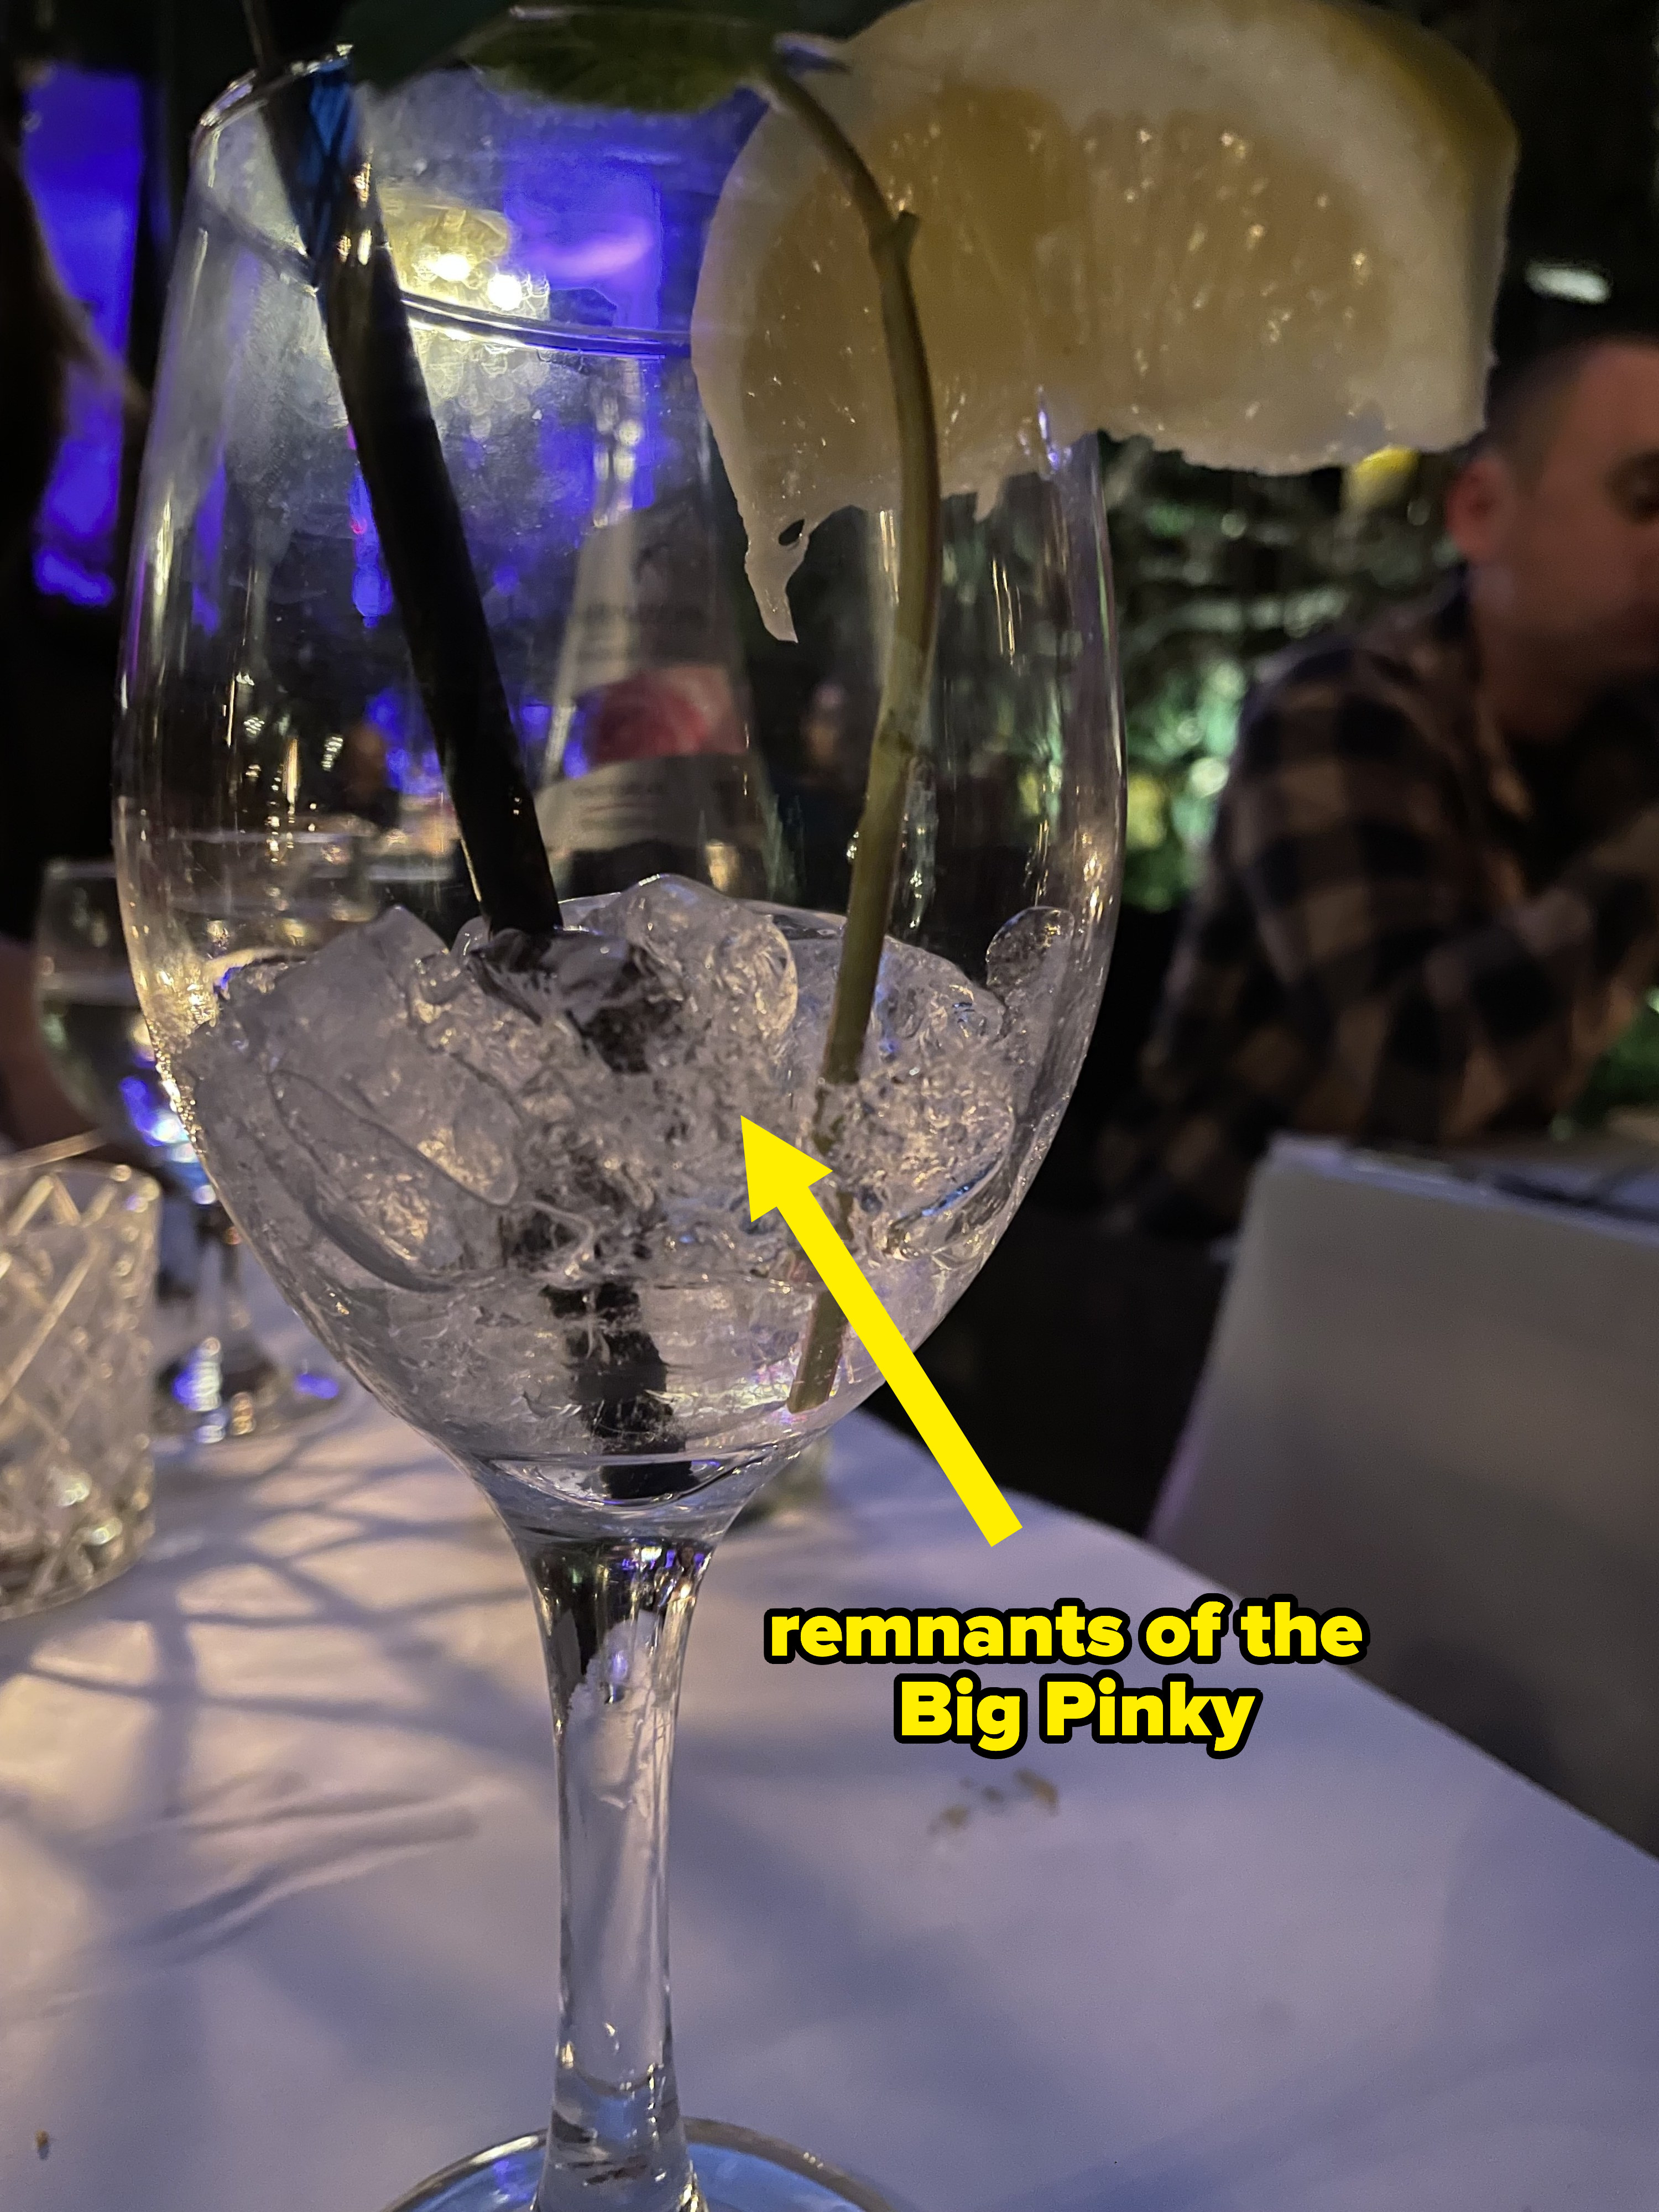 A shot of the Big Pinky